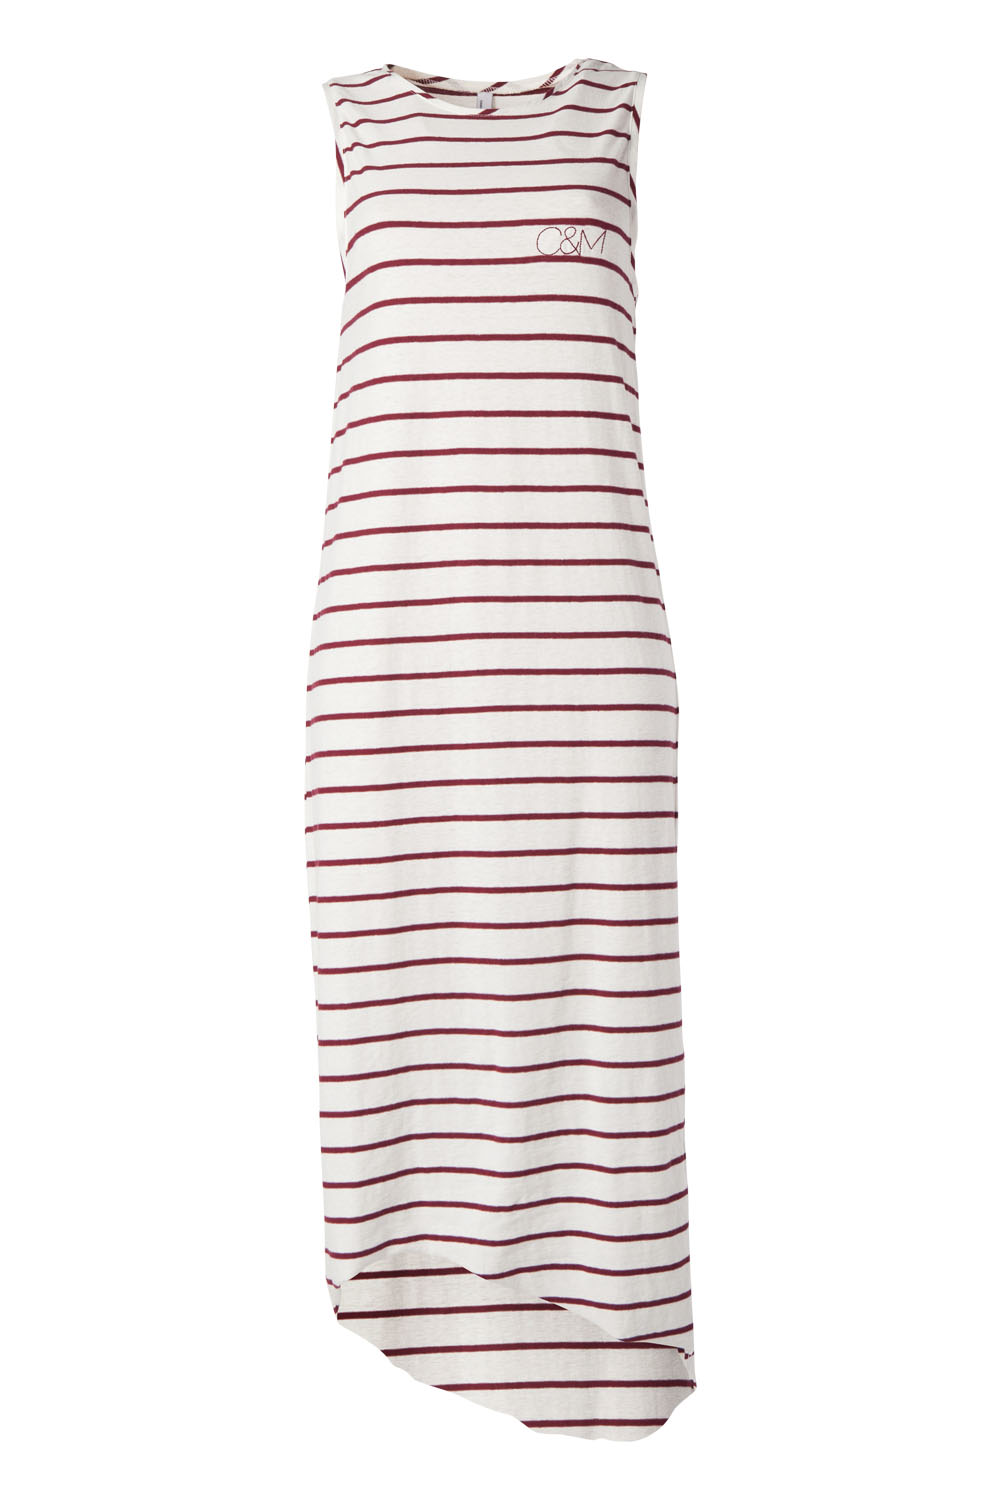 Dress, $159, by Camilla and Marc.